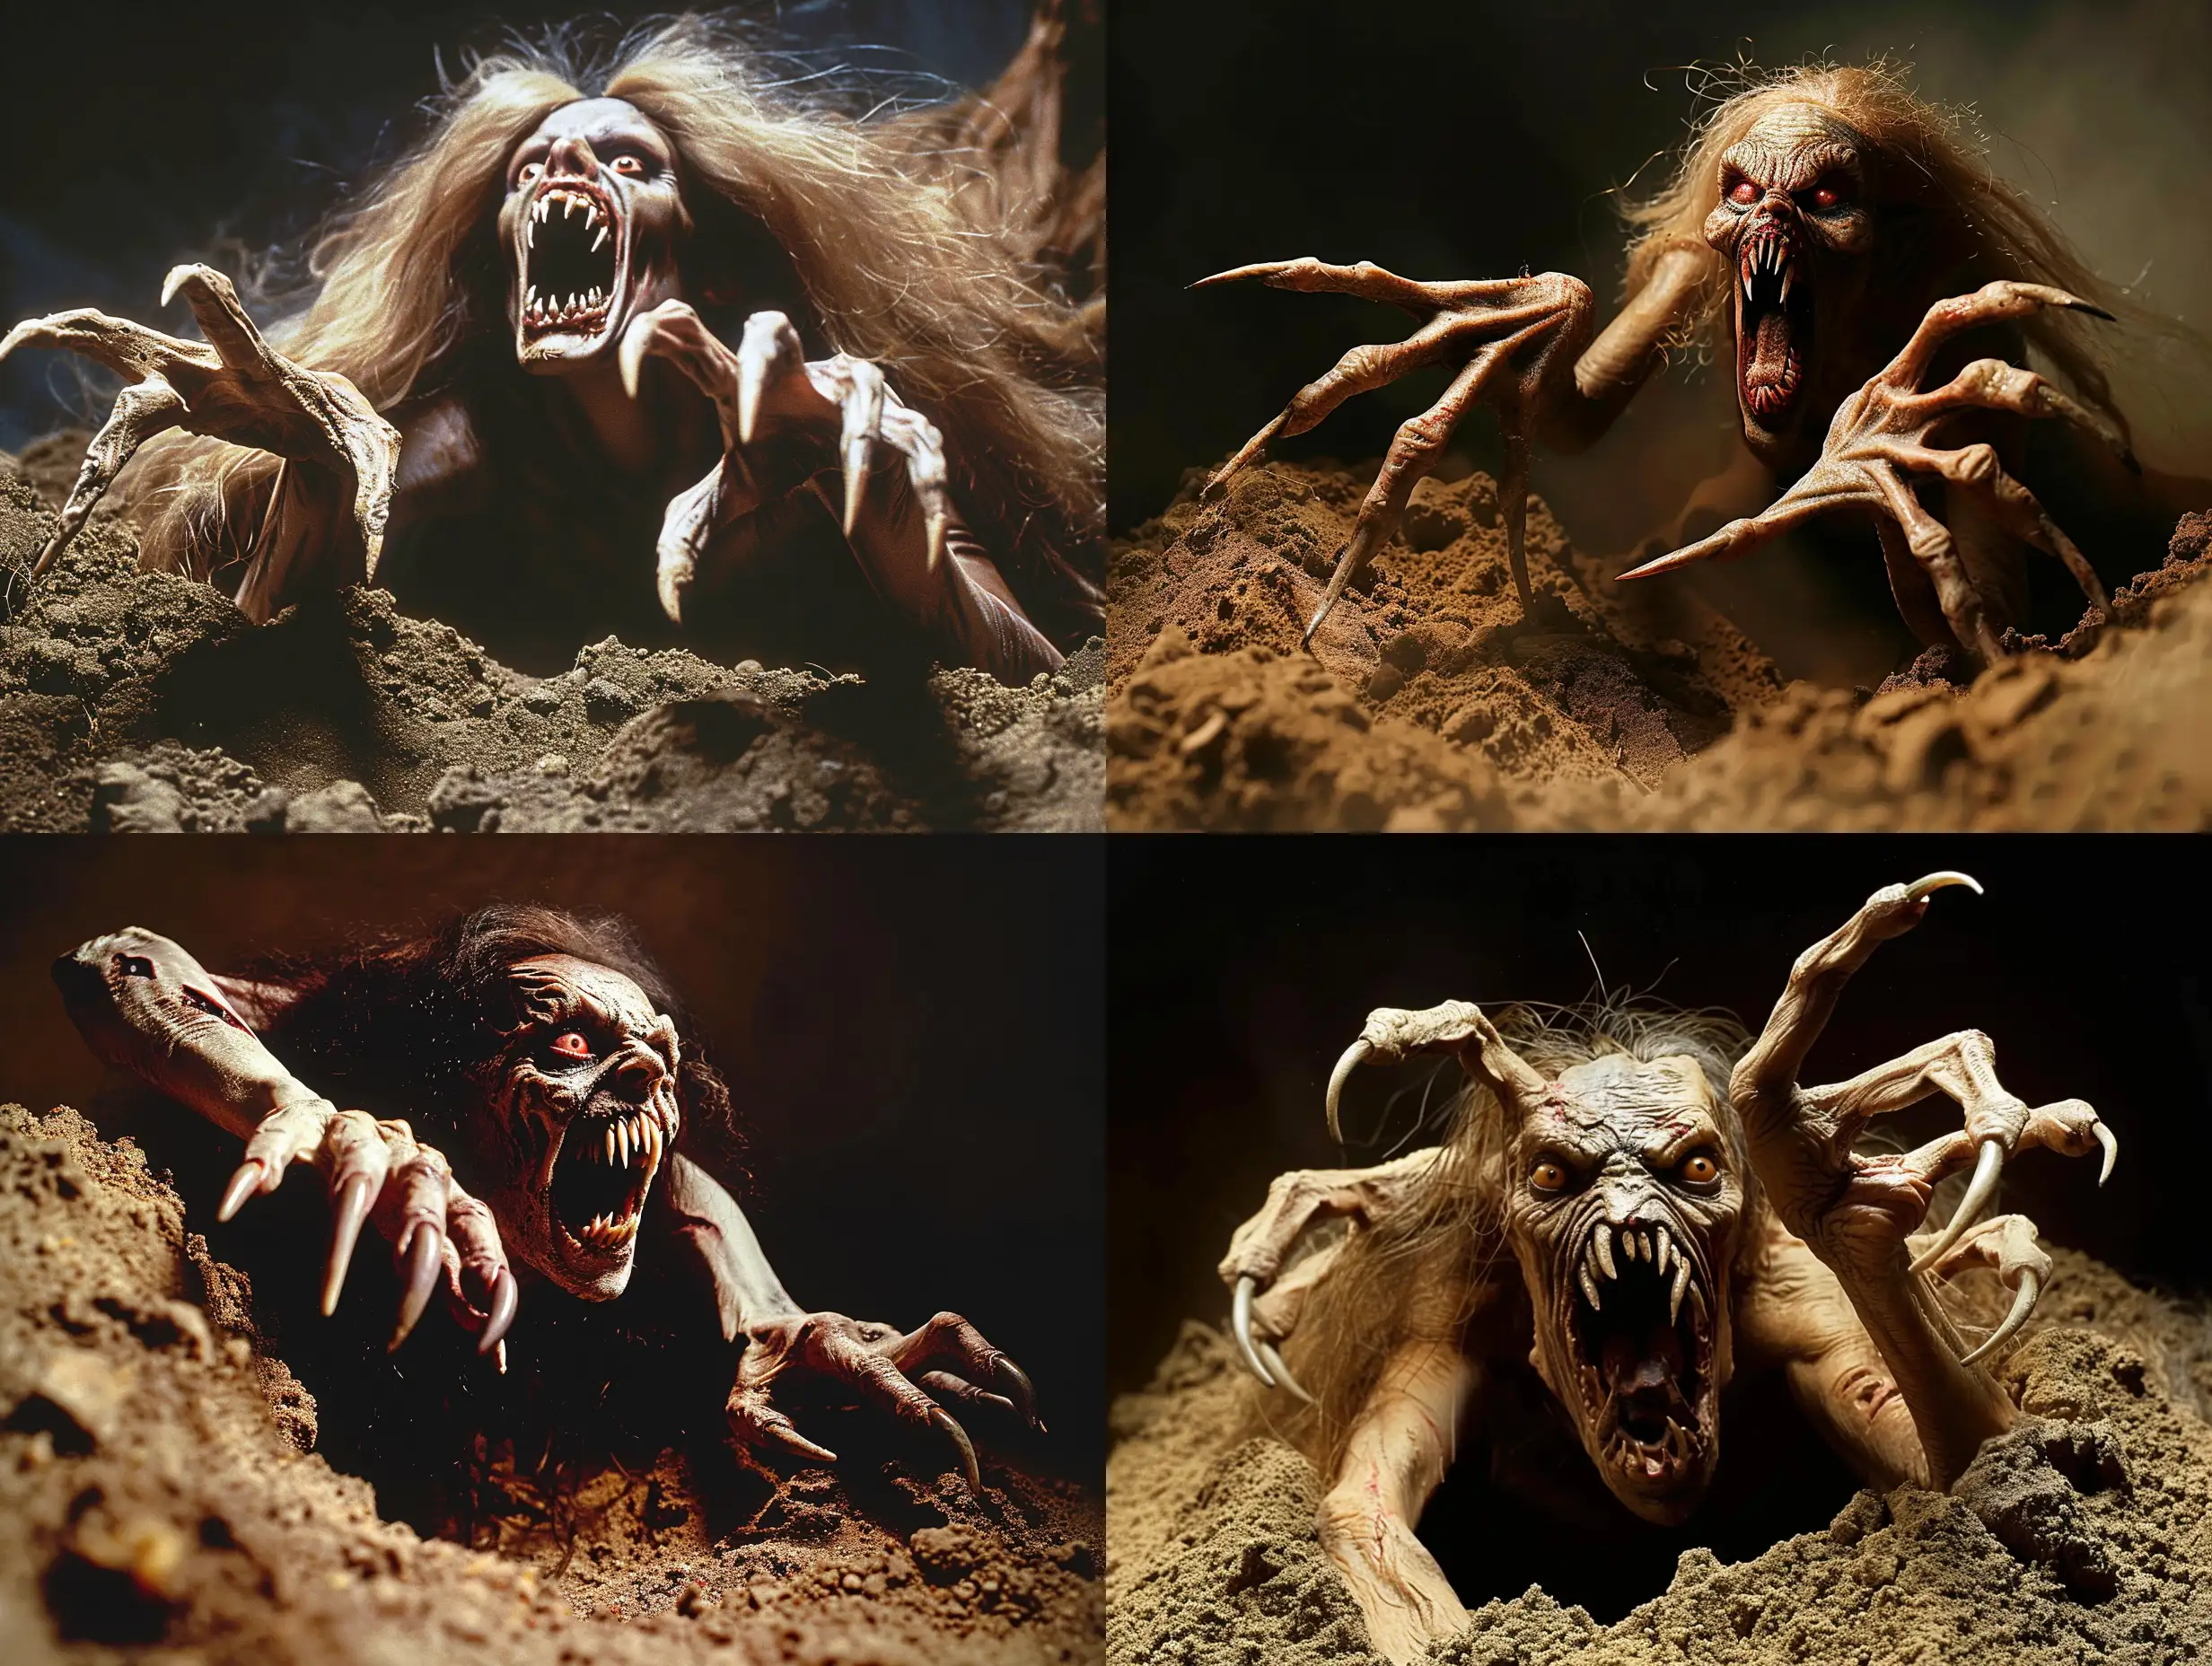 Eerie-Vampire-Emerges-from-the-Grave-with-Clawed-Hands